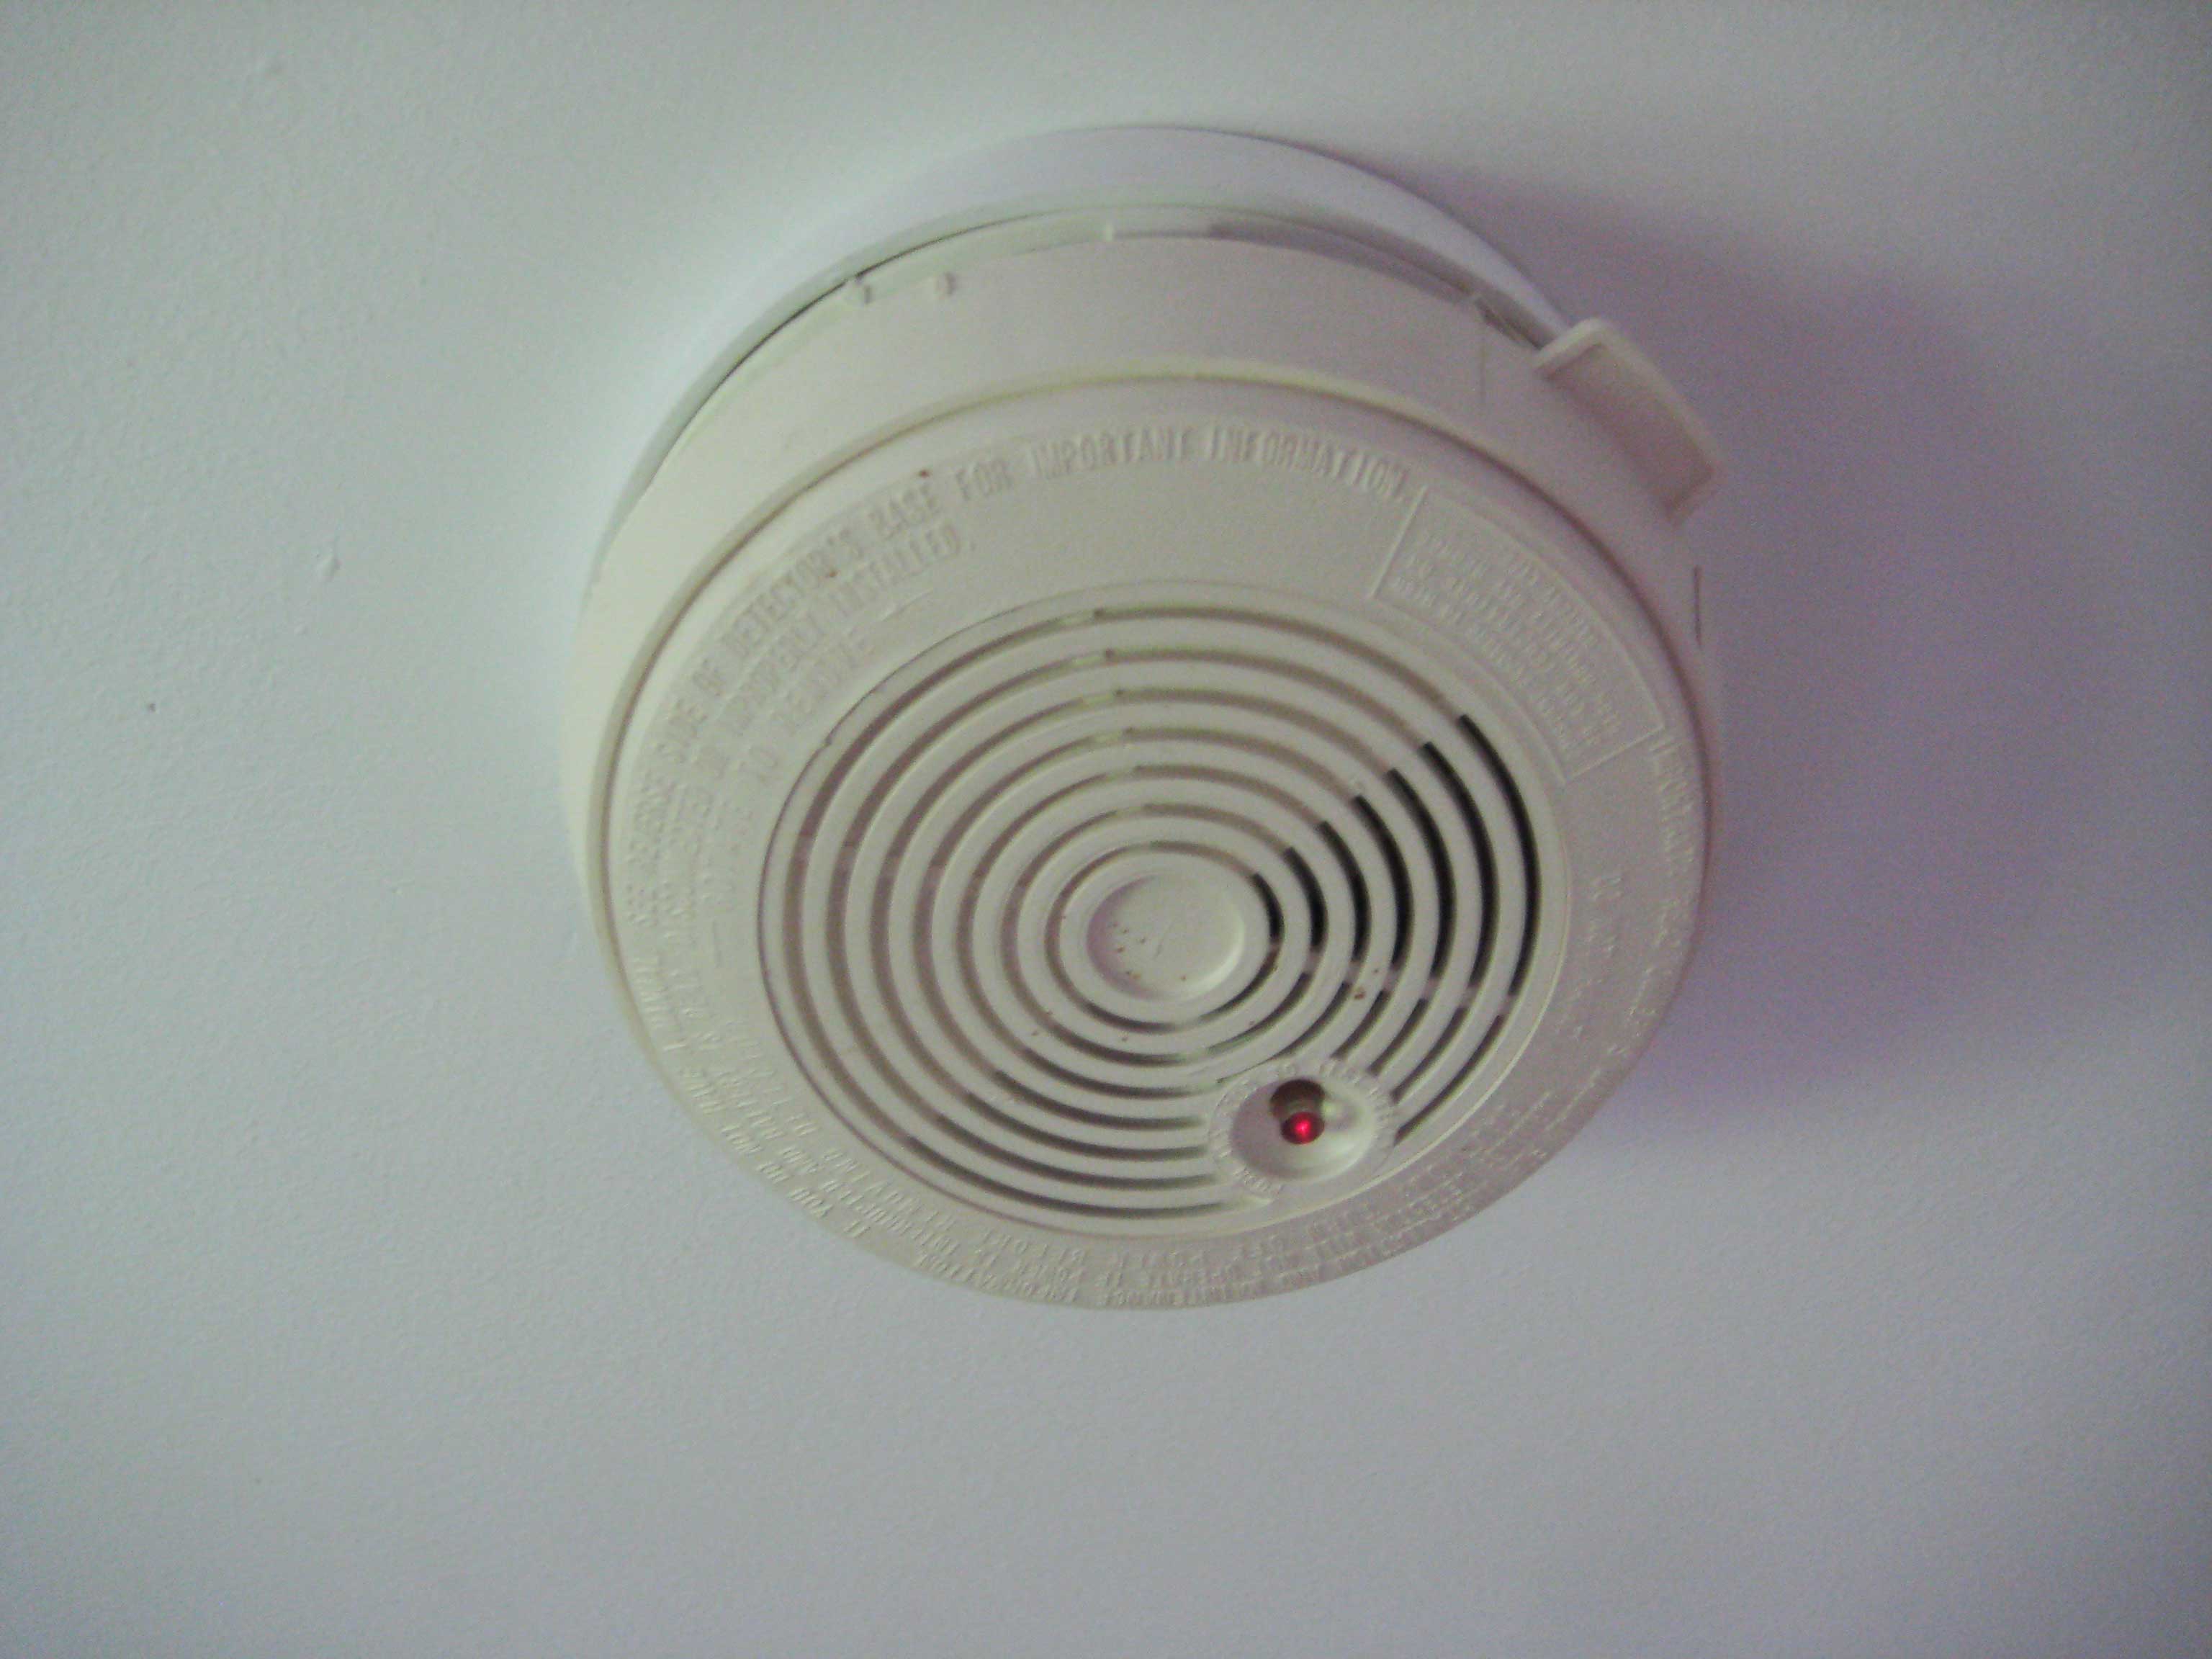 How To Change A Battery In A Smoke Alarm All Smoke Alarms Need Batteries Diy Doctor